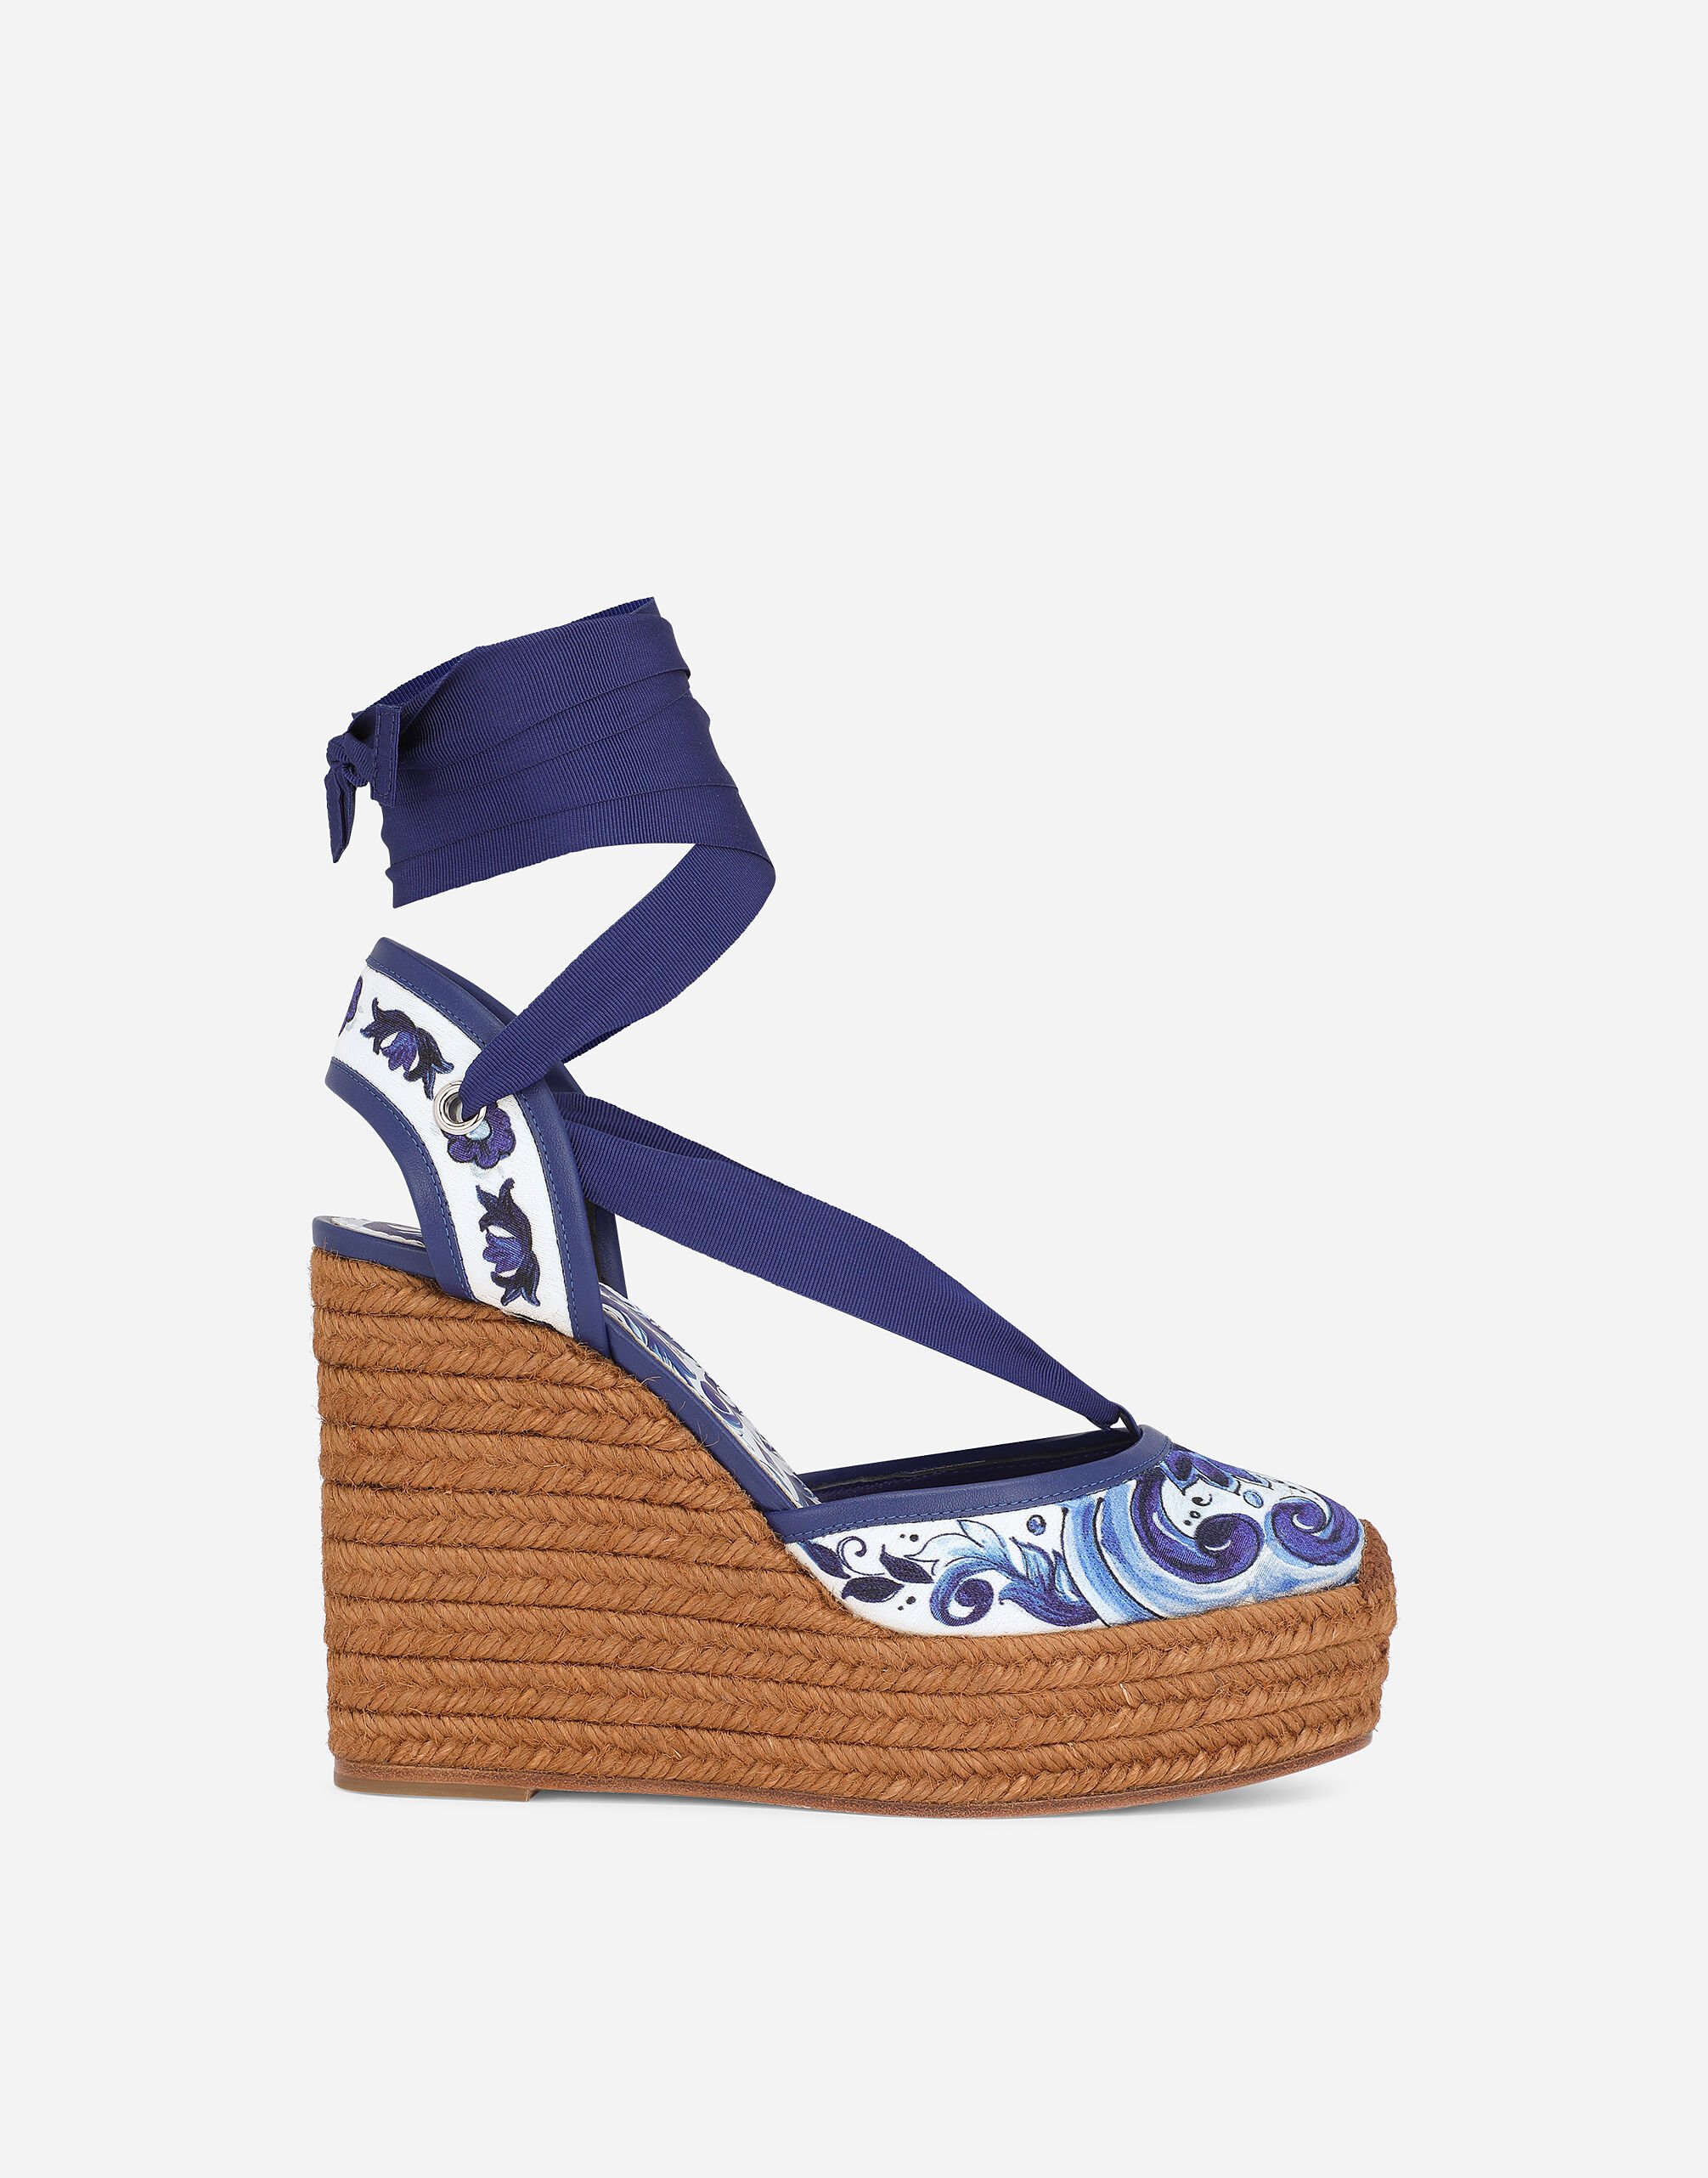 Dolce & Gabbana Rope-soled wedges in printed brocade fabric Multicolor CZ0294AG836